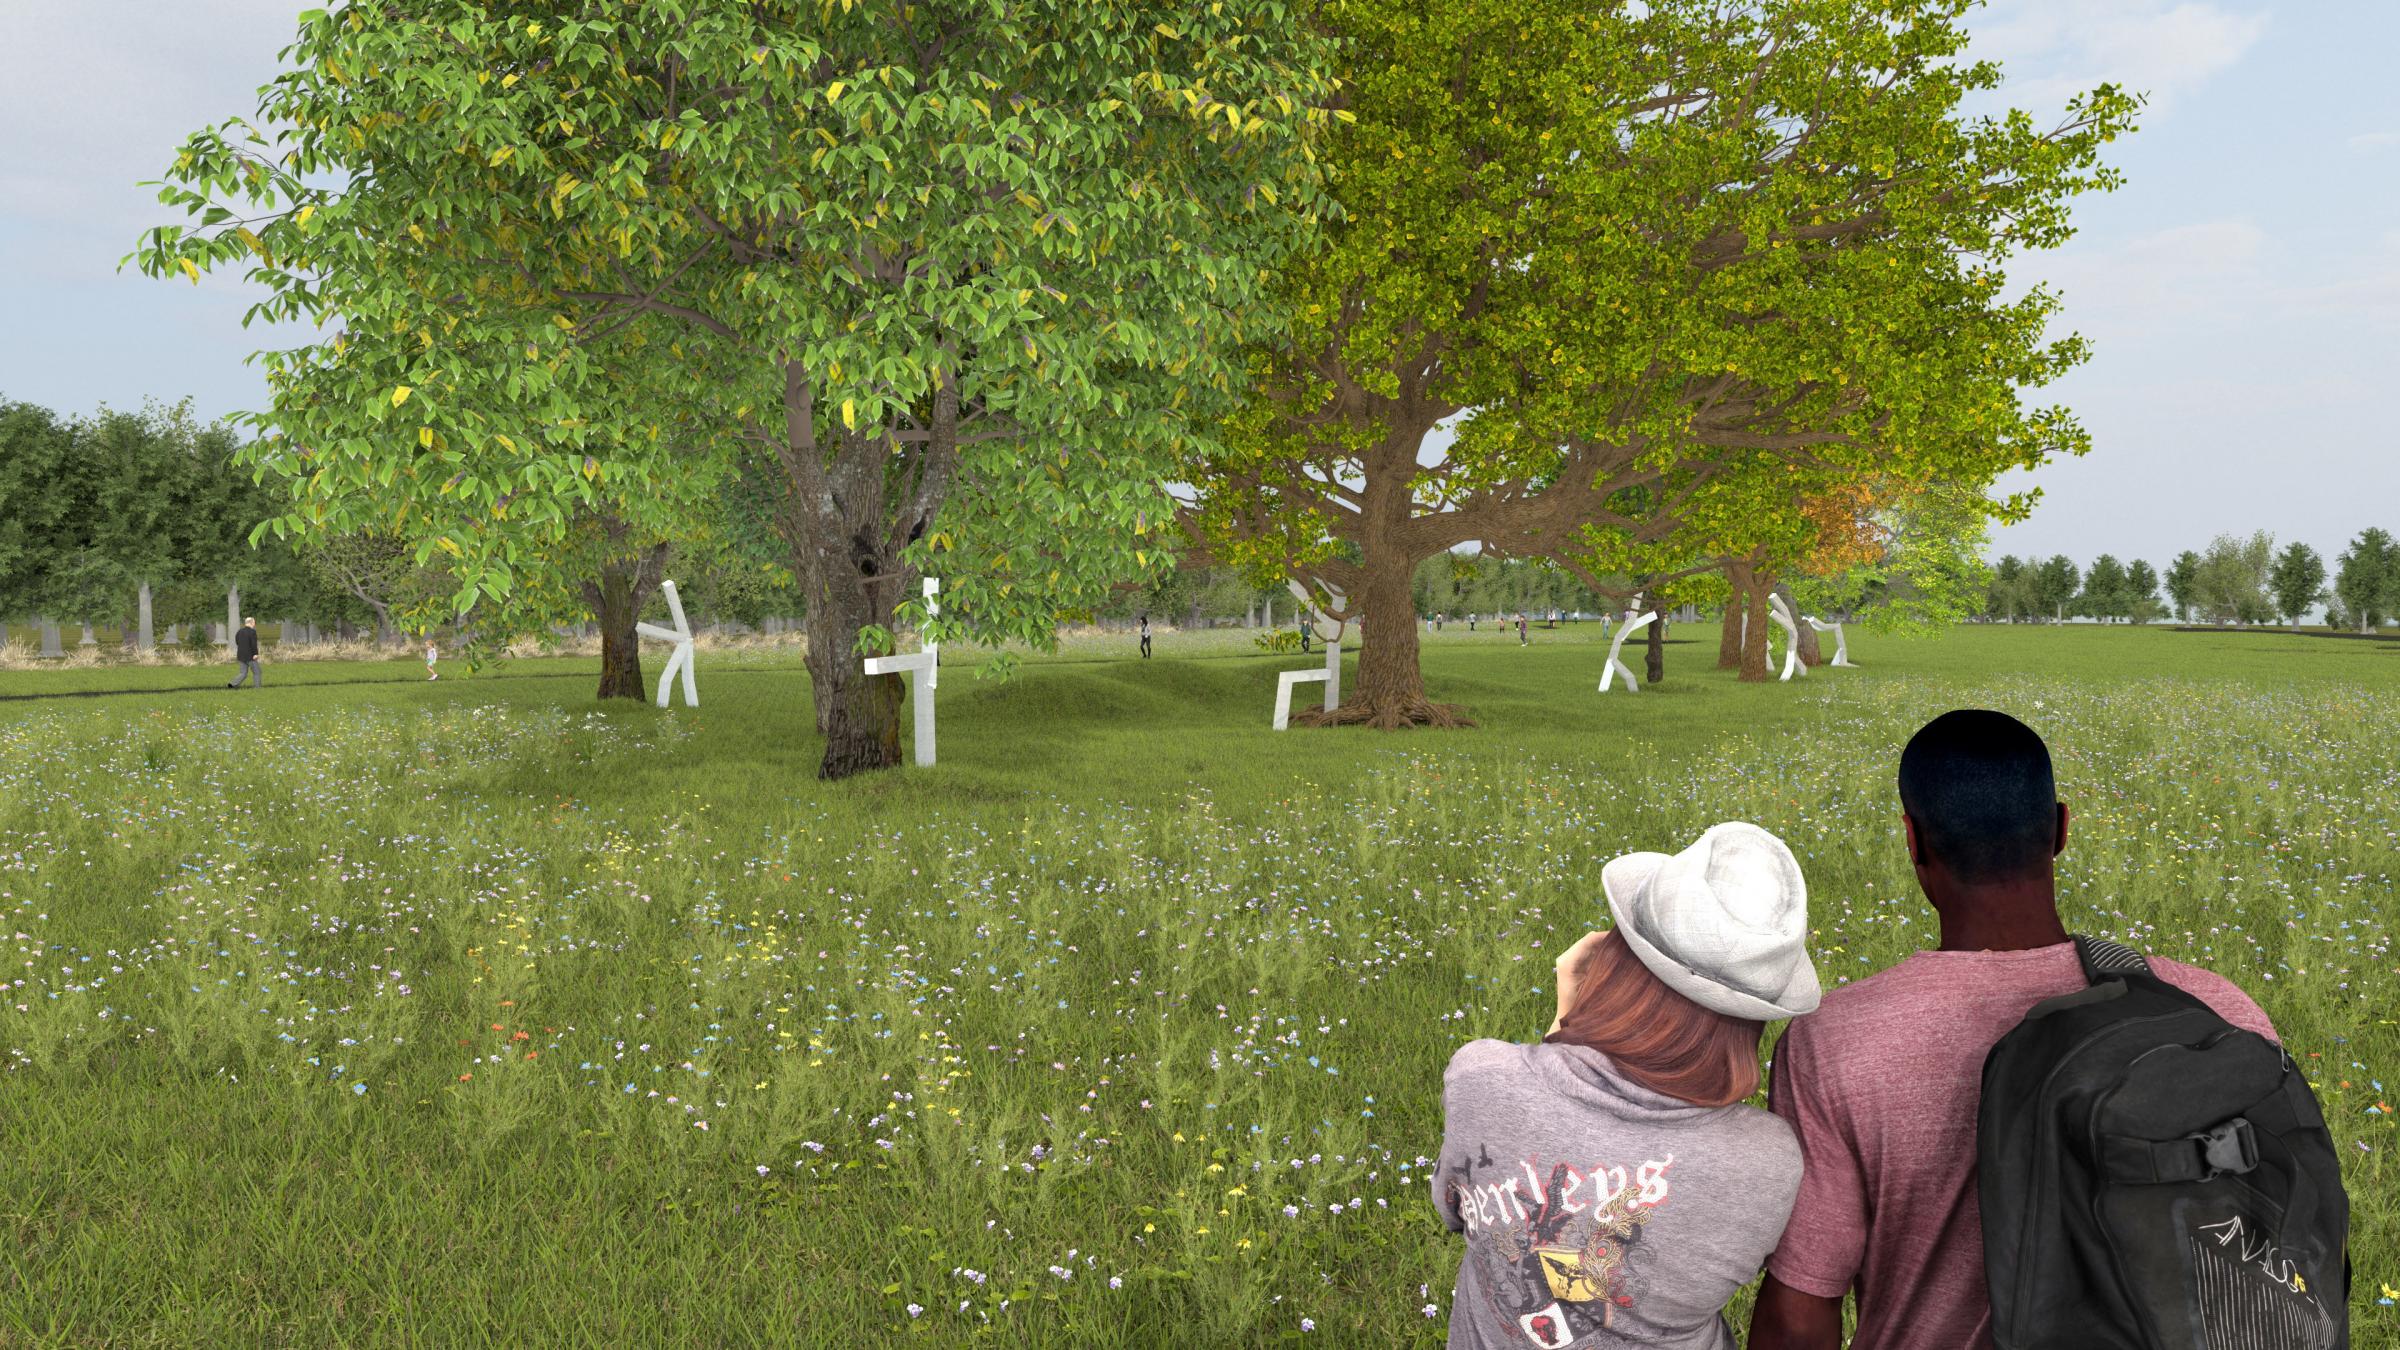 Artists impression of I Remember: Scotlands covid memorial at riverside grove, at Pollok Country Park, Glasgow.